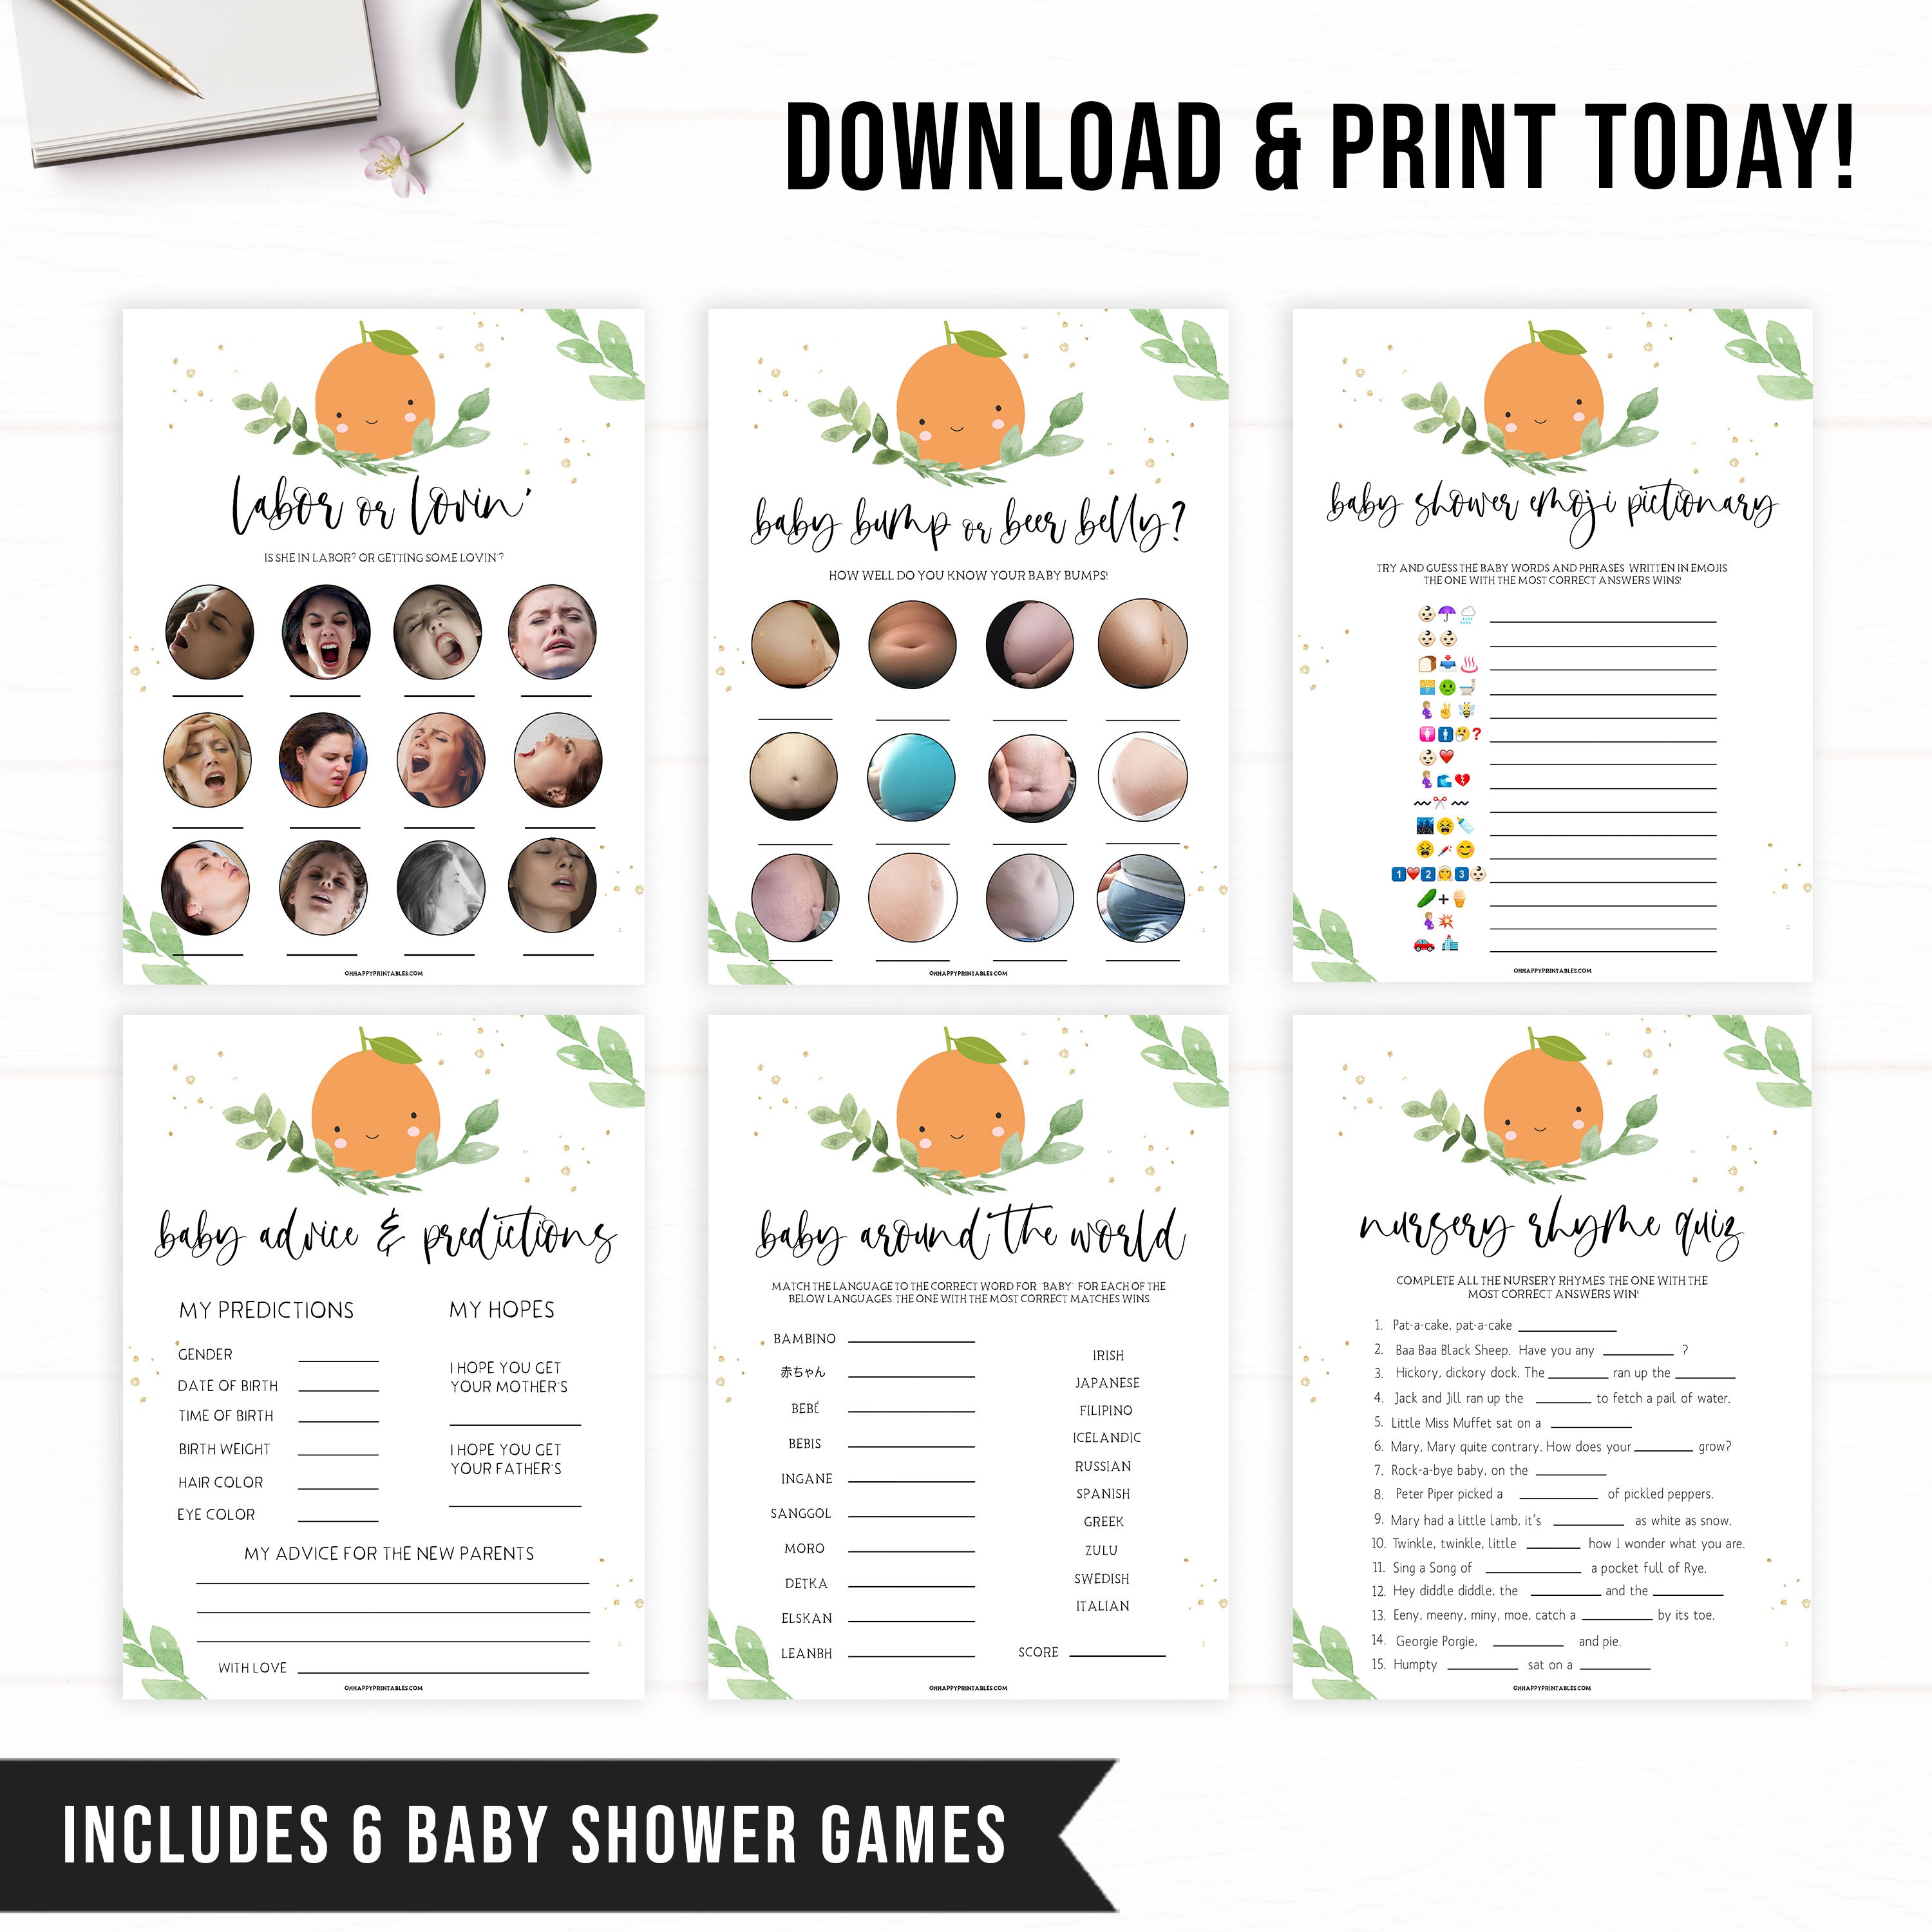 6 baby shower games, Printable baby shower games, little cutie baby games, baby shower games, fun baby shower ideas, top baby shower ideas, little cutie baby shower, baby shower games, fun little cutie baby shower ideas